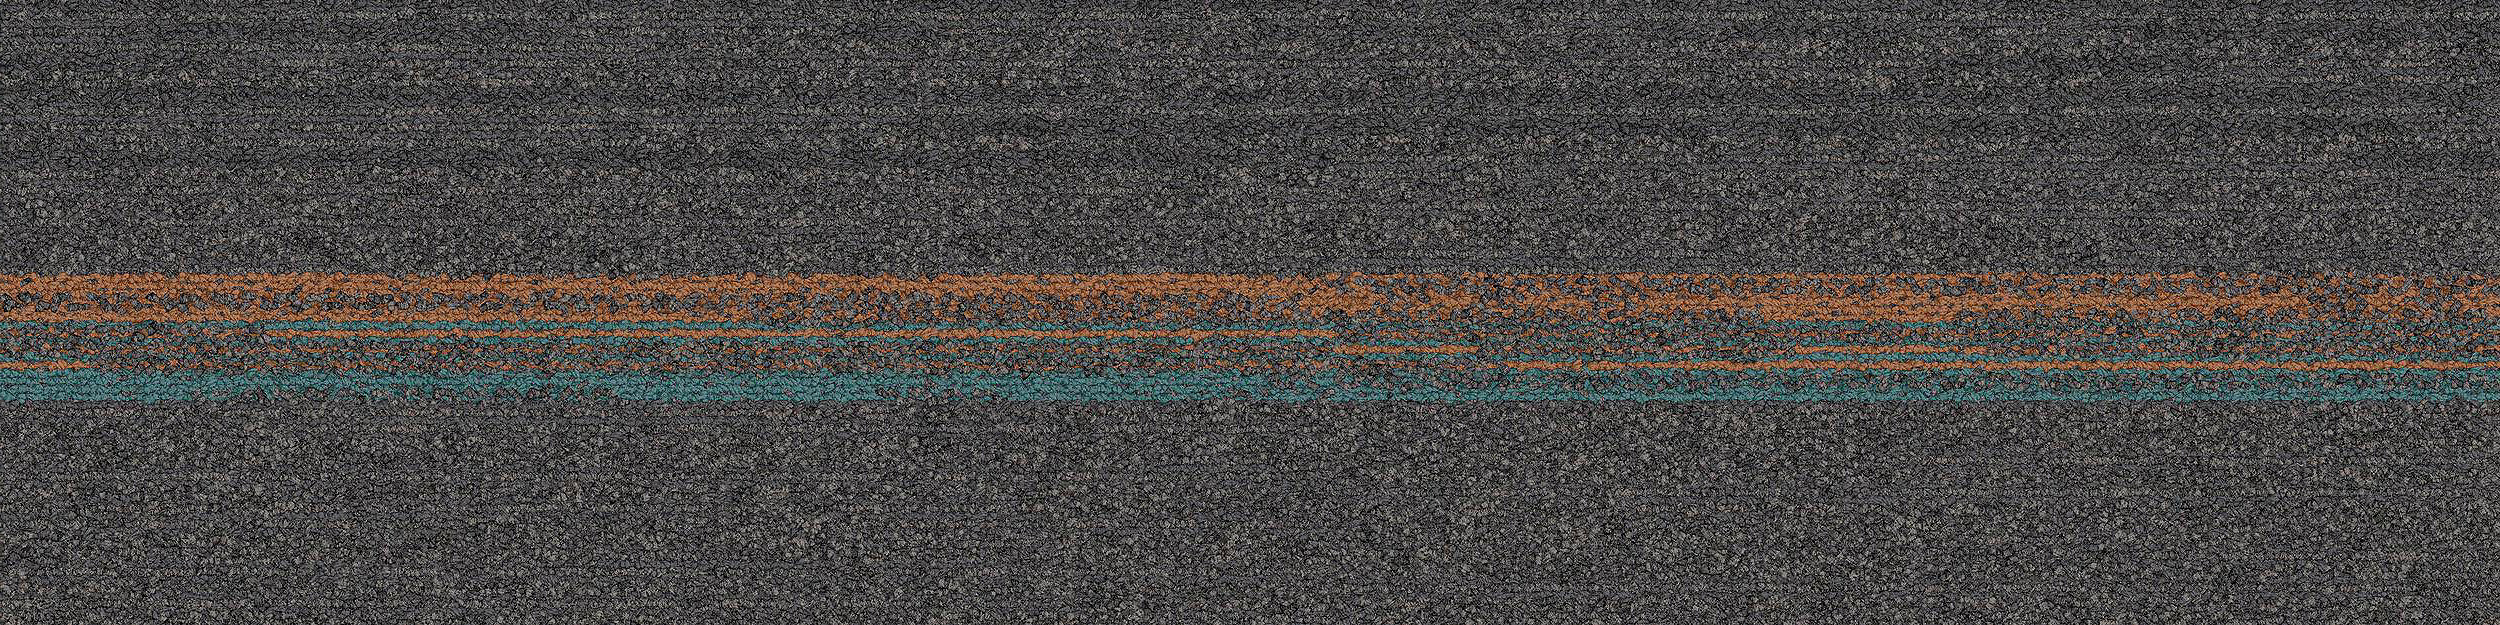 Ground Waves Carpet Tile in Iron/Colors image number 13